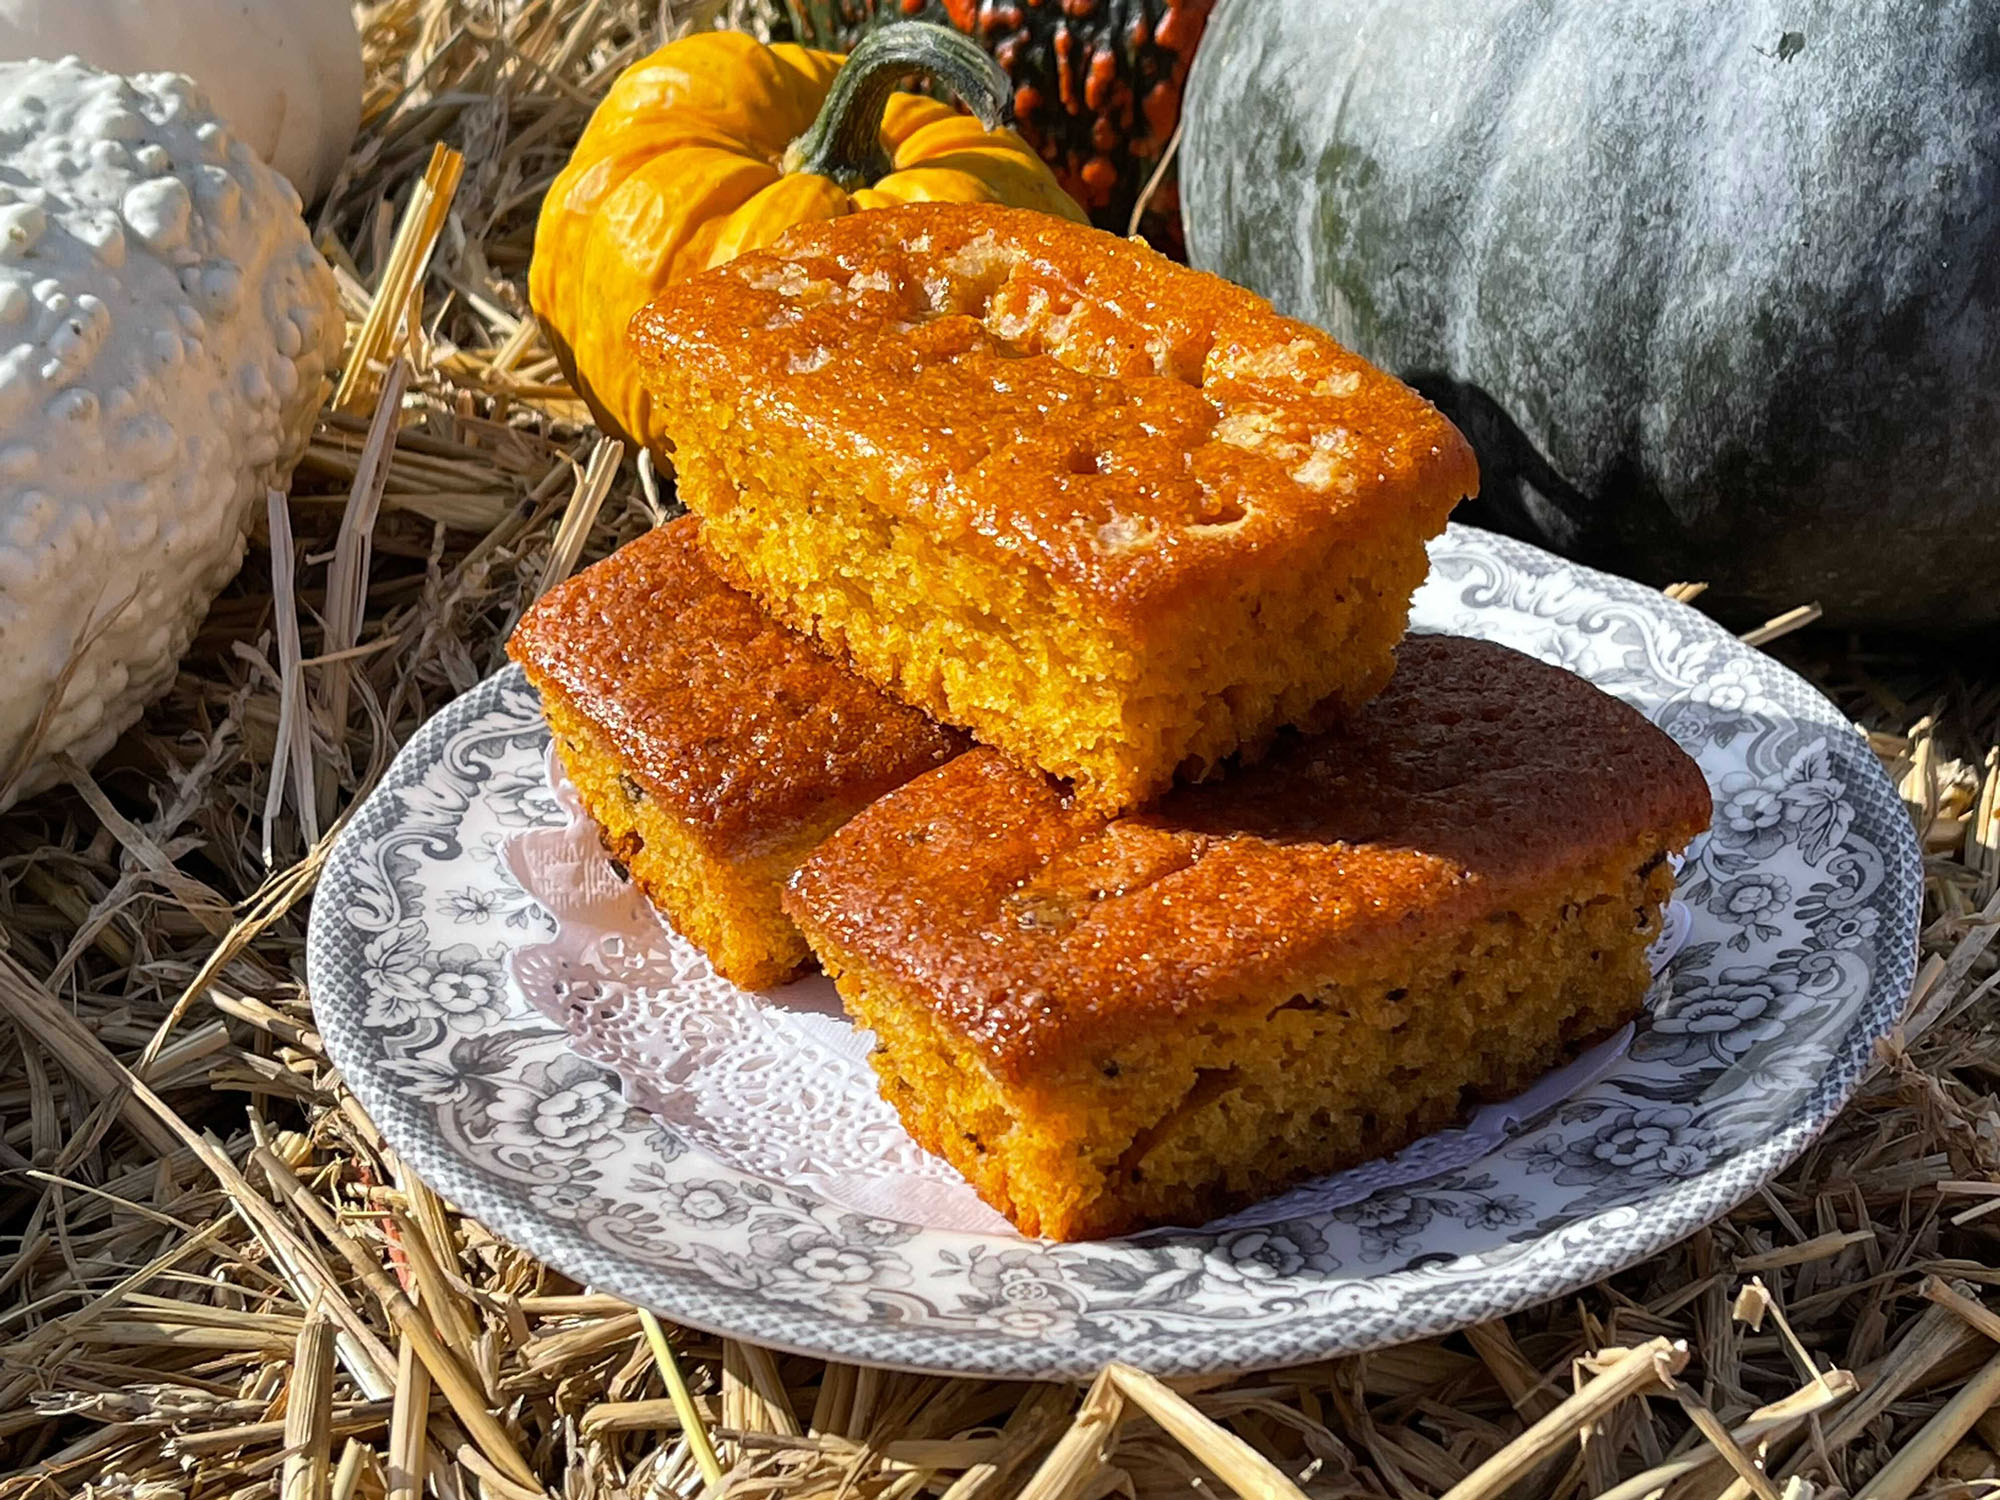 Tasty treats and refreshments for the Pumpkin Patch 2021